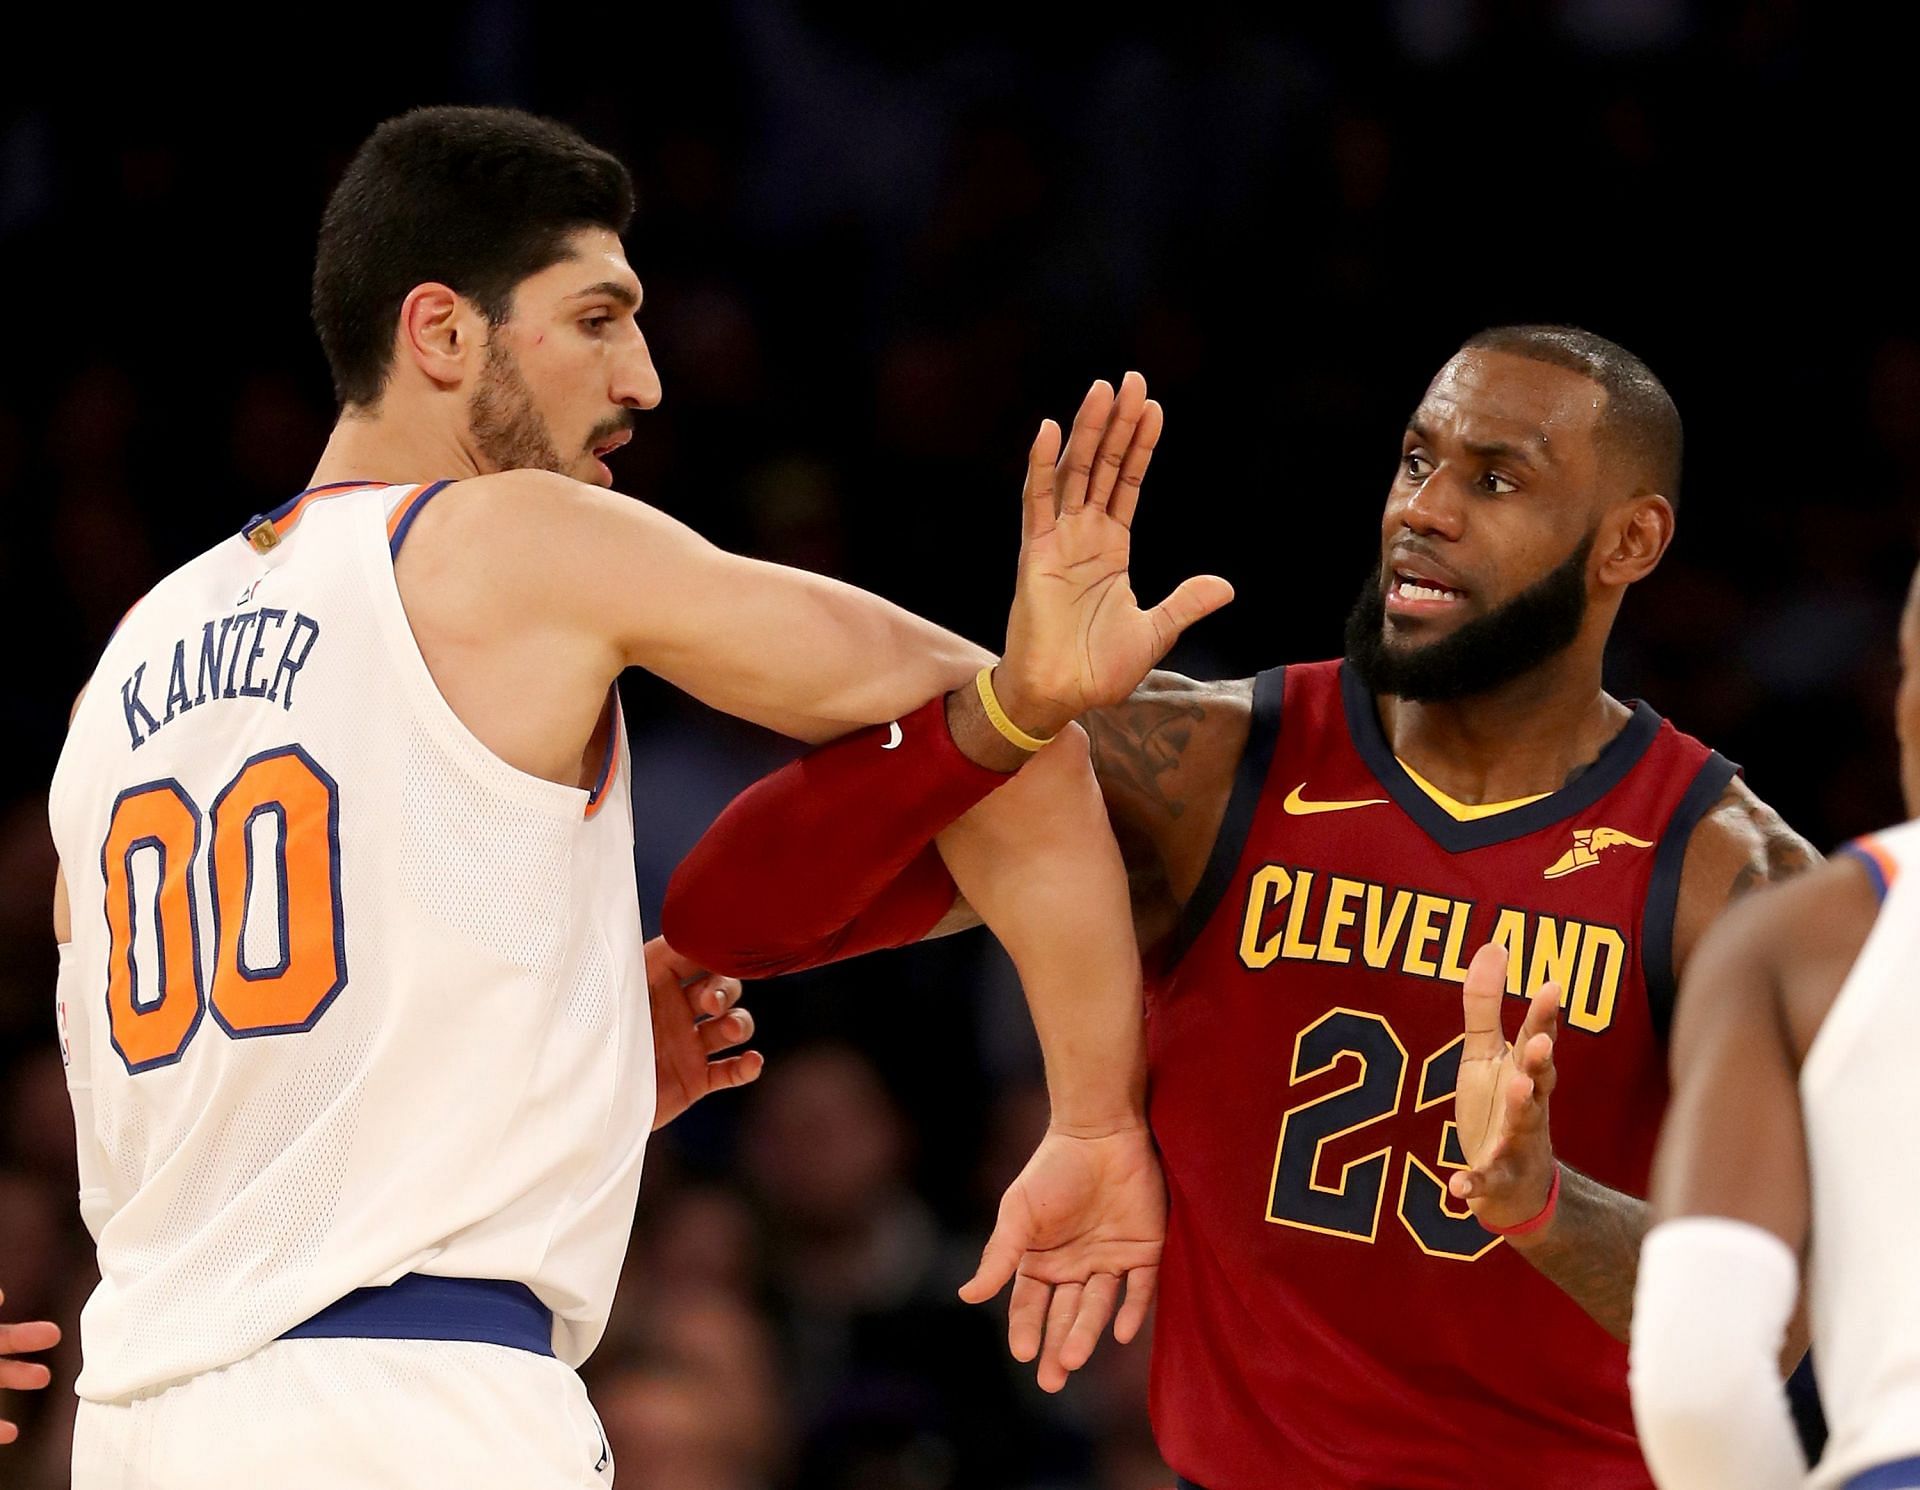 Enes Kanter Freedom of the New York Knicks and LeBron James of the Cleveland Cavaliers back in 2017.